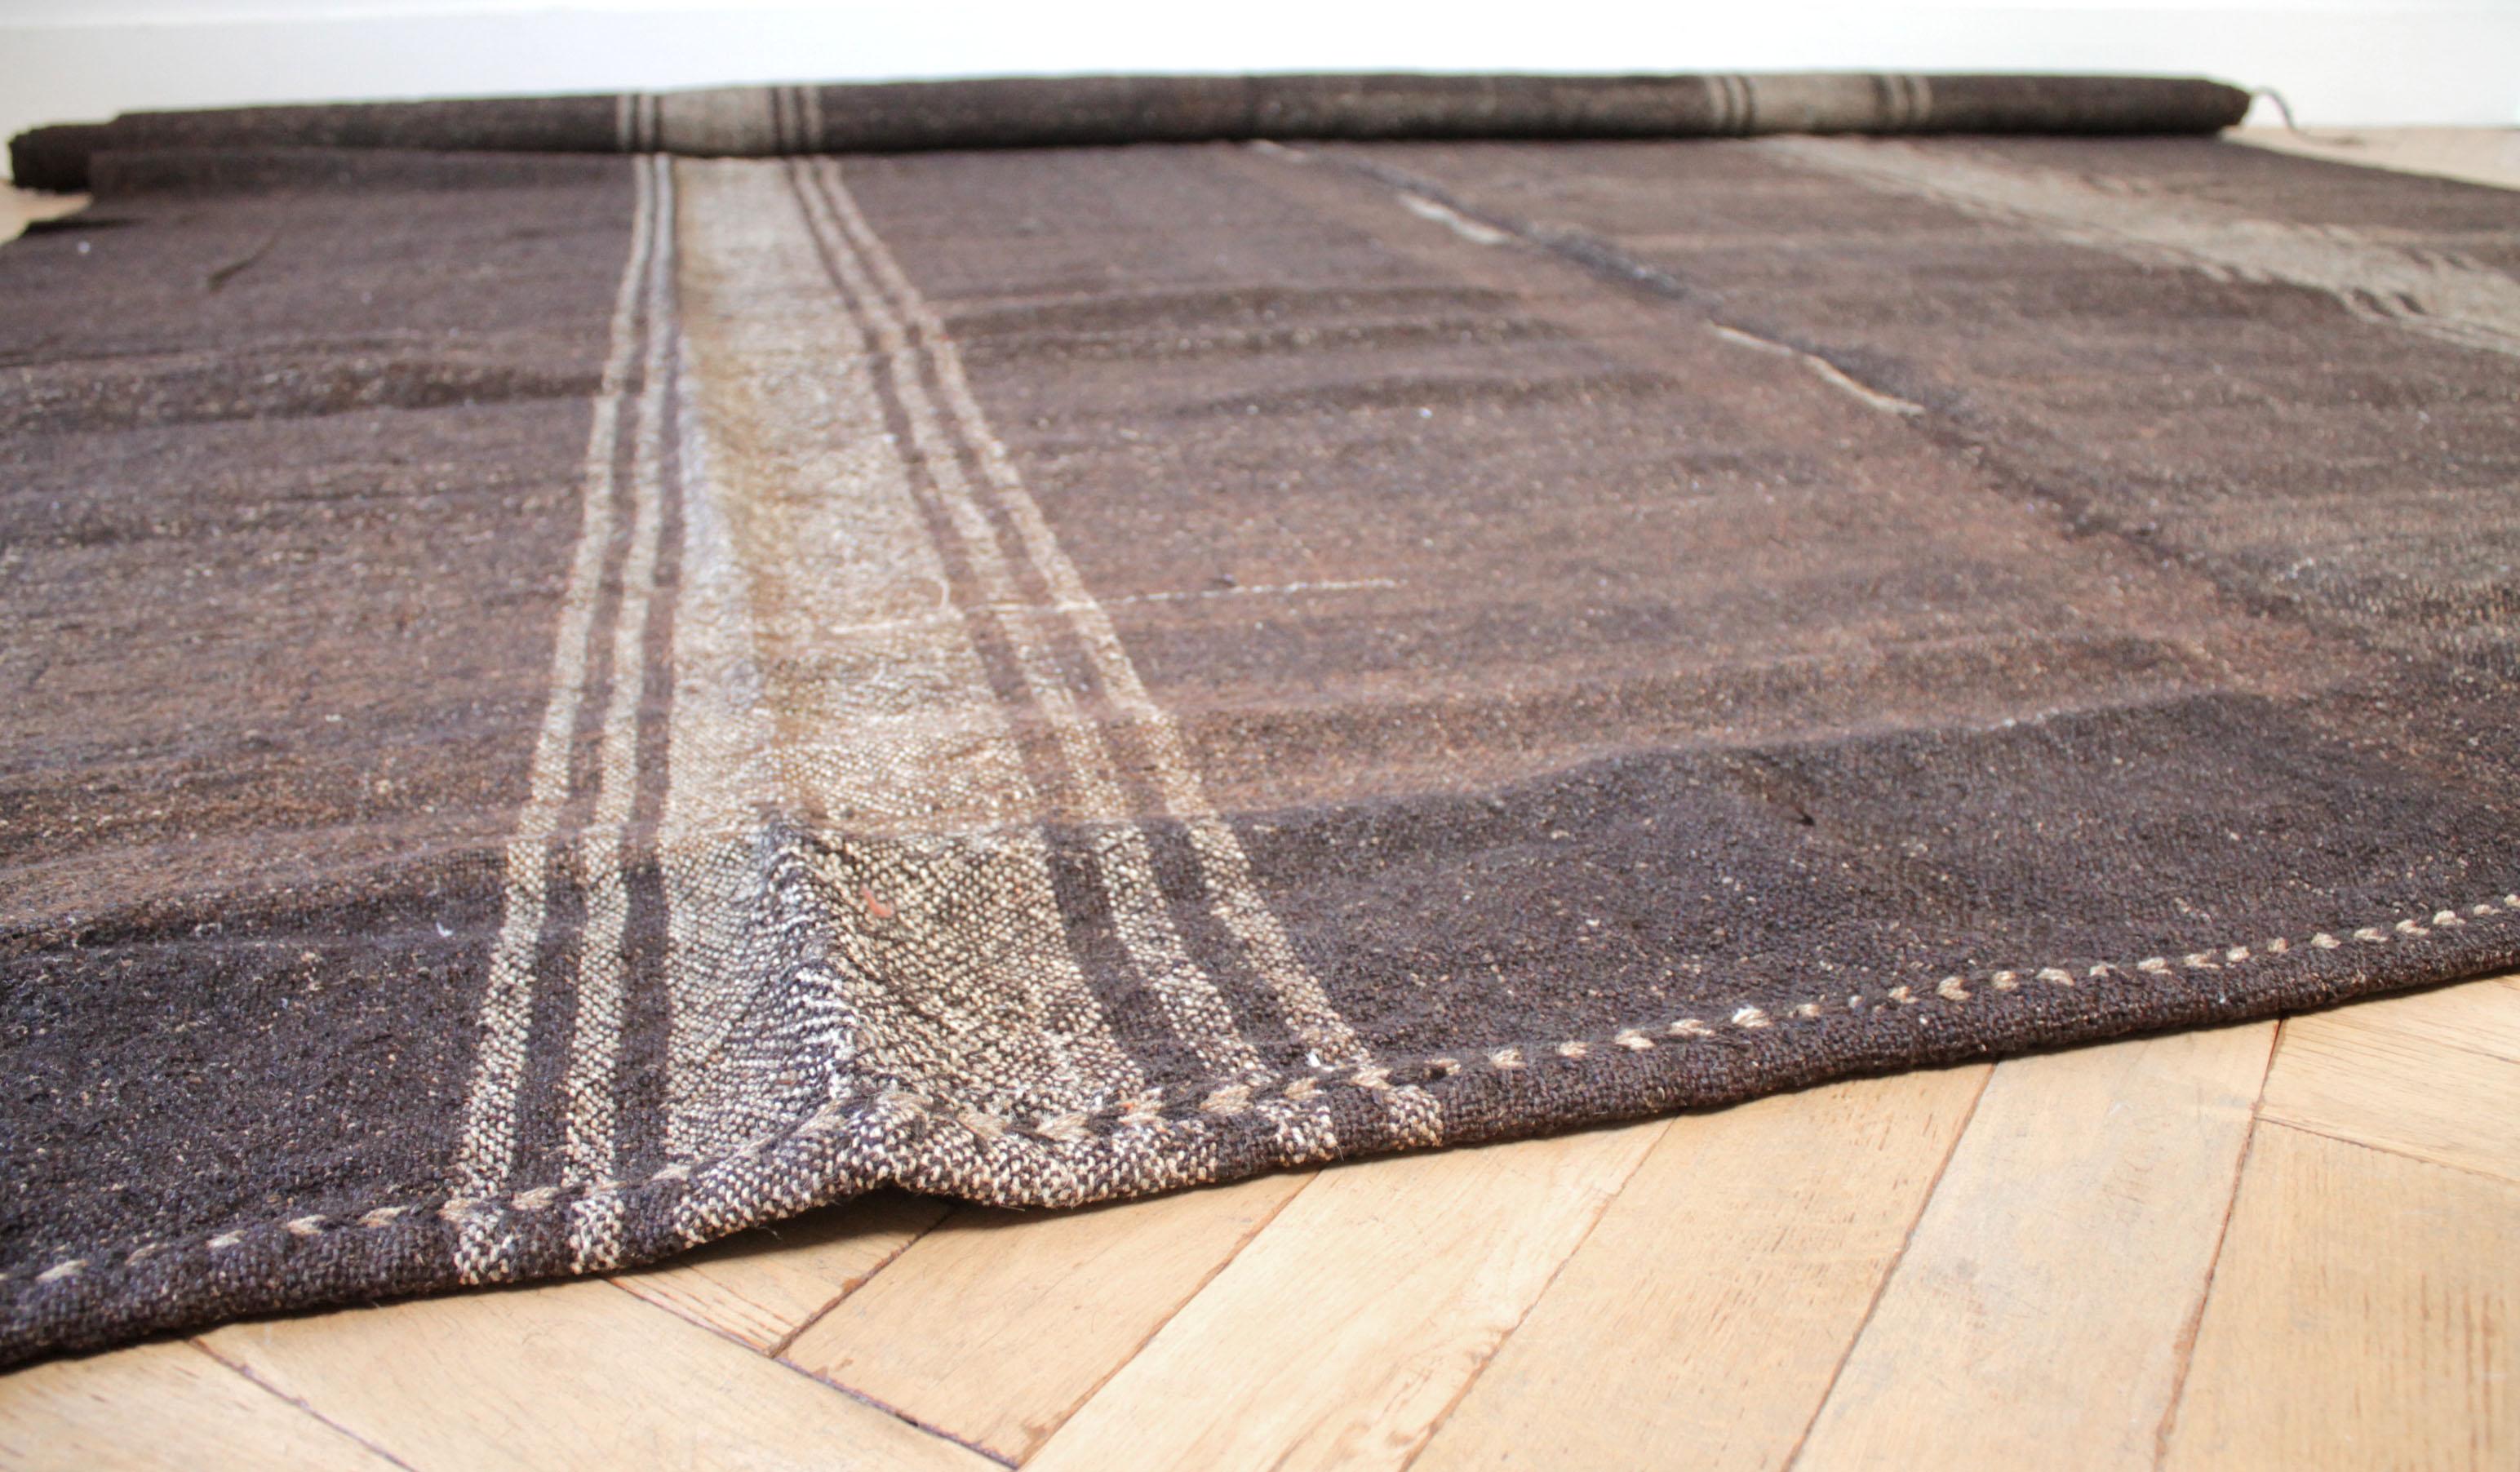 Vintage Turkish Rug in Cocoa Brown and Light Natural Stripes Double Wide In Good Condition For Sale In Brea, CA